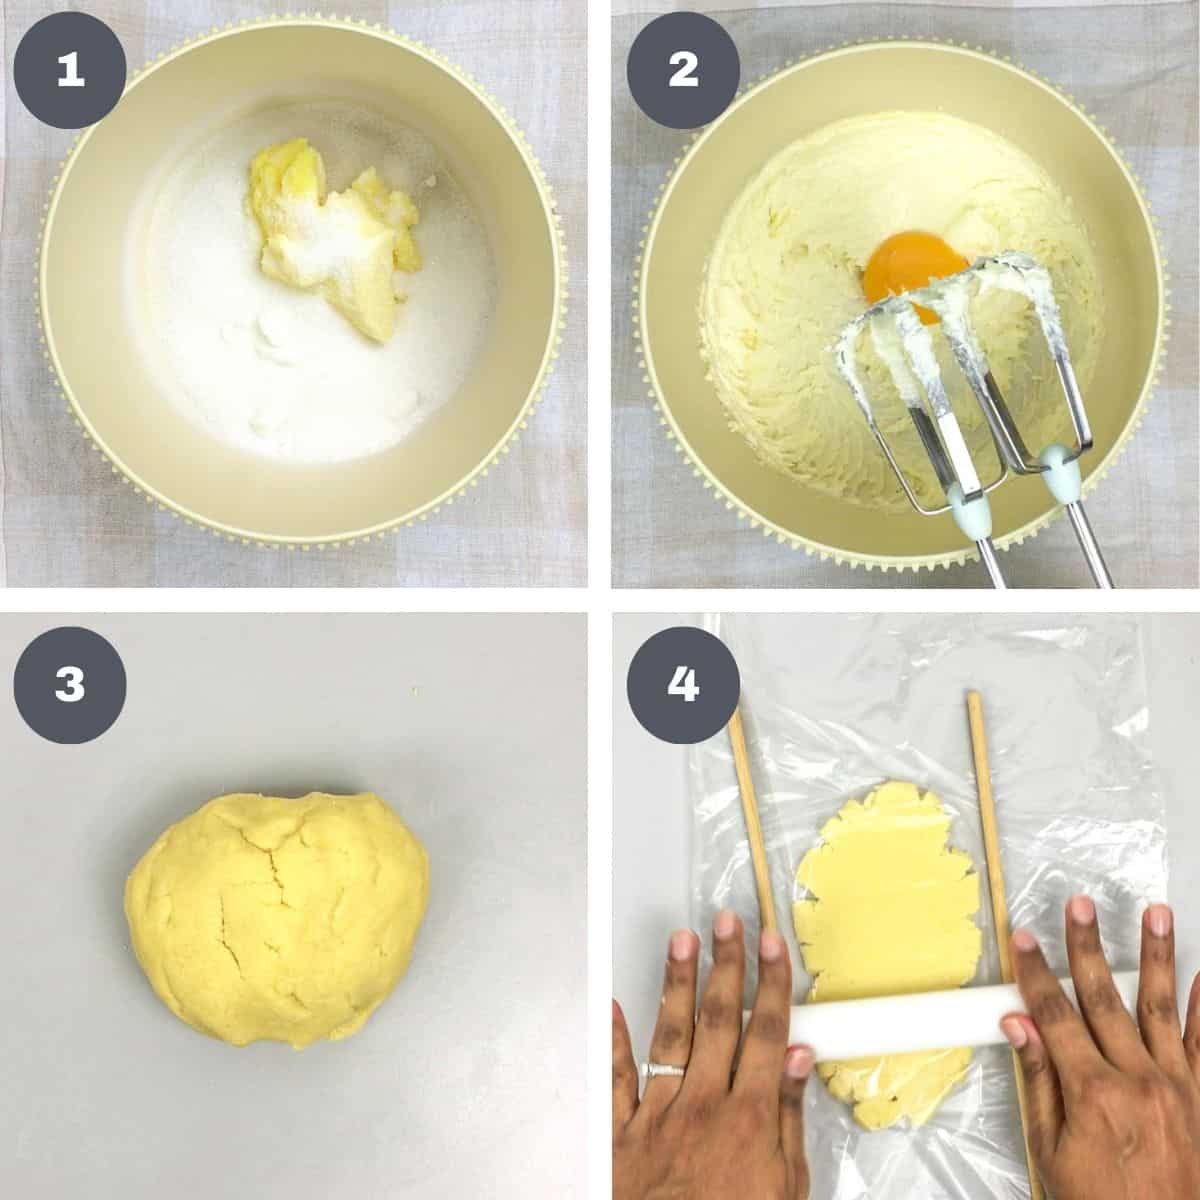 A poster of 4 images showing how to mix cookie dough.